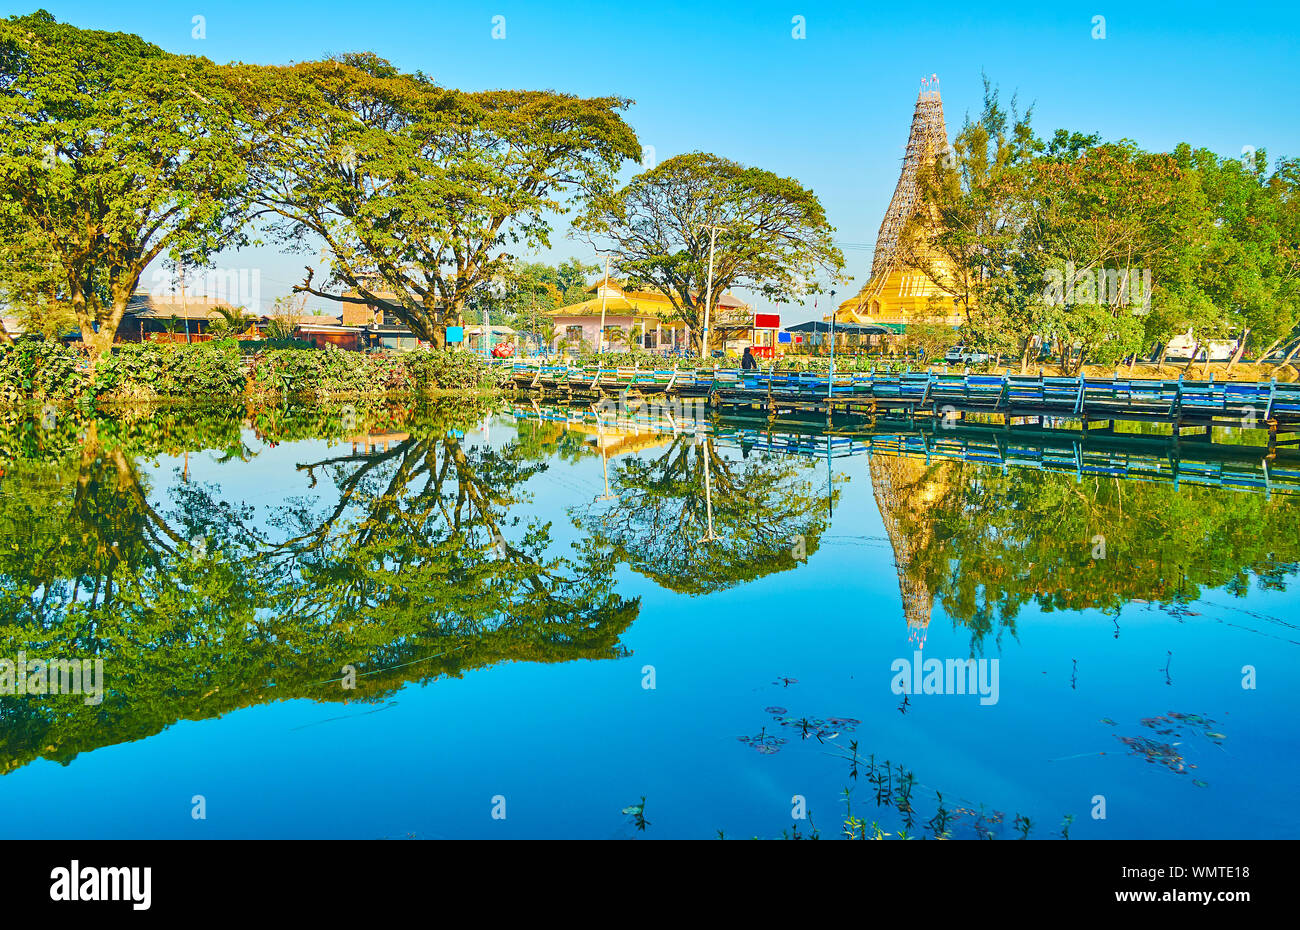 The pleasant walk by the Tharzi pond, surrounded by greenery, that hides golden pagoda of Buddhist Temple, Nyaungshwe, Myanmar Stock Photo